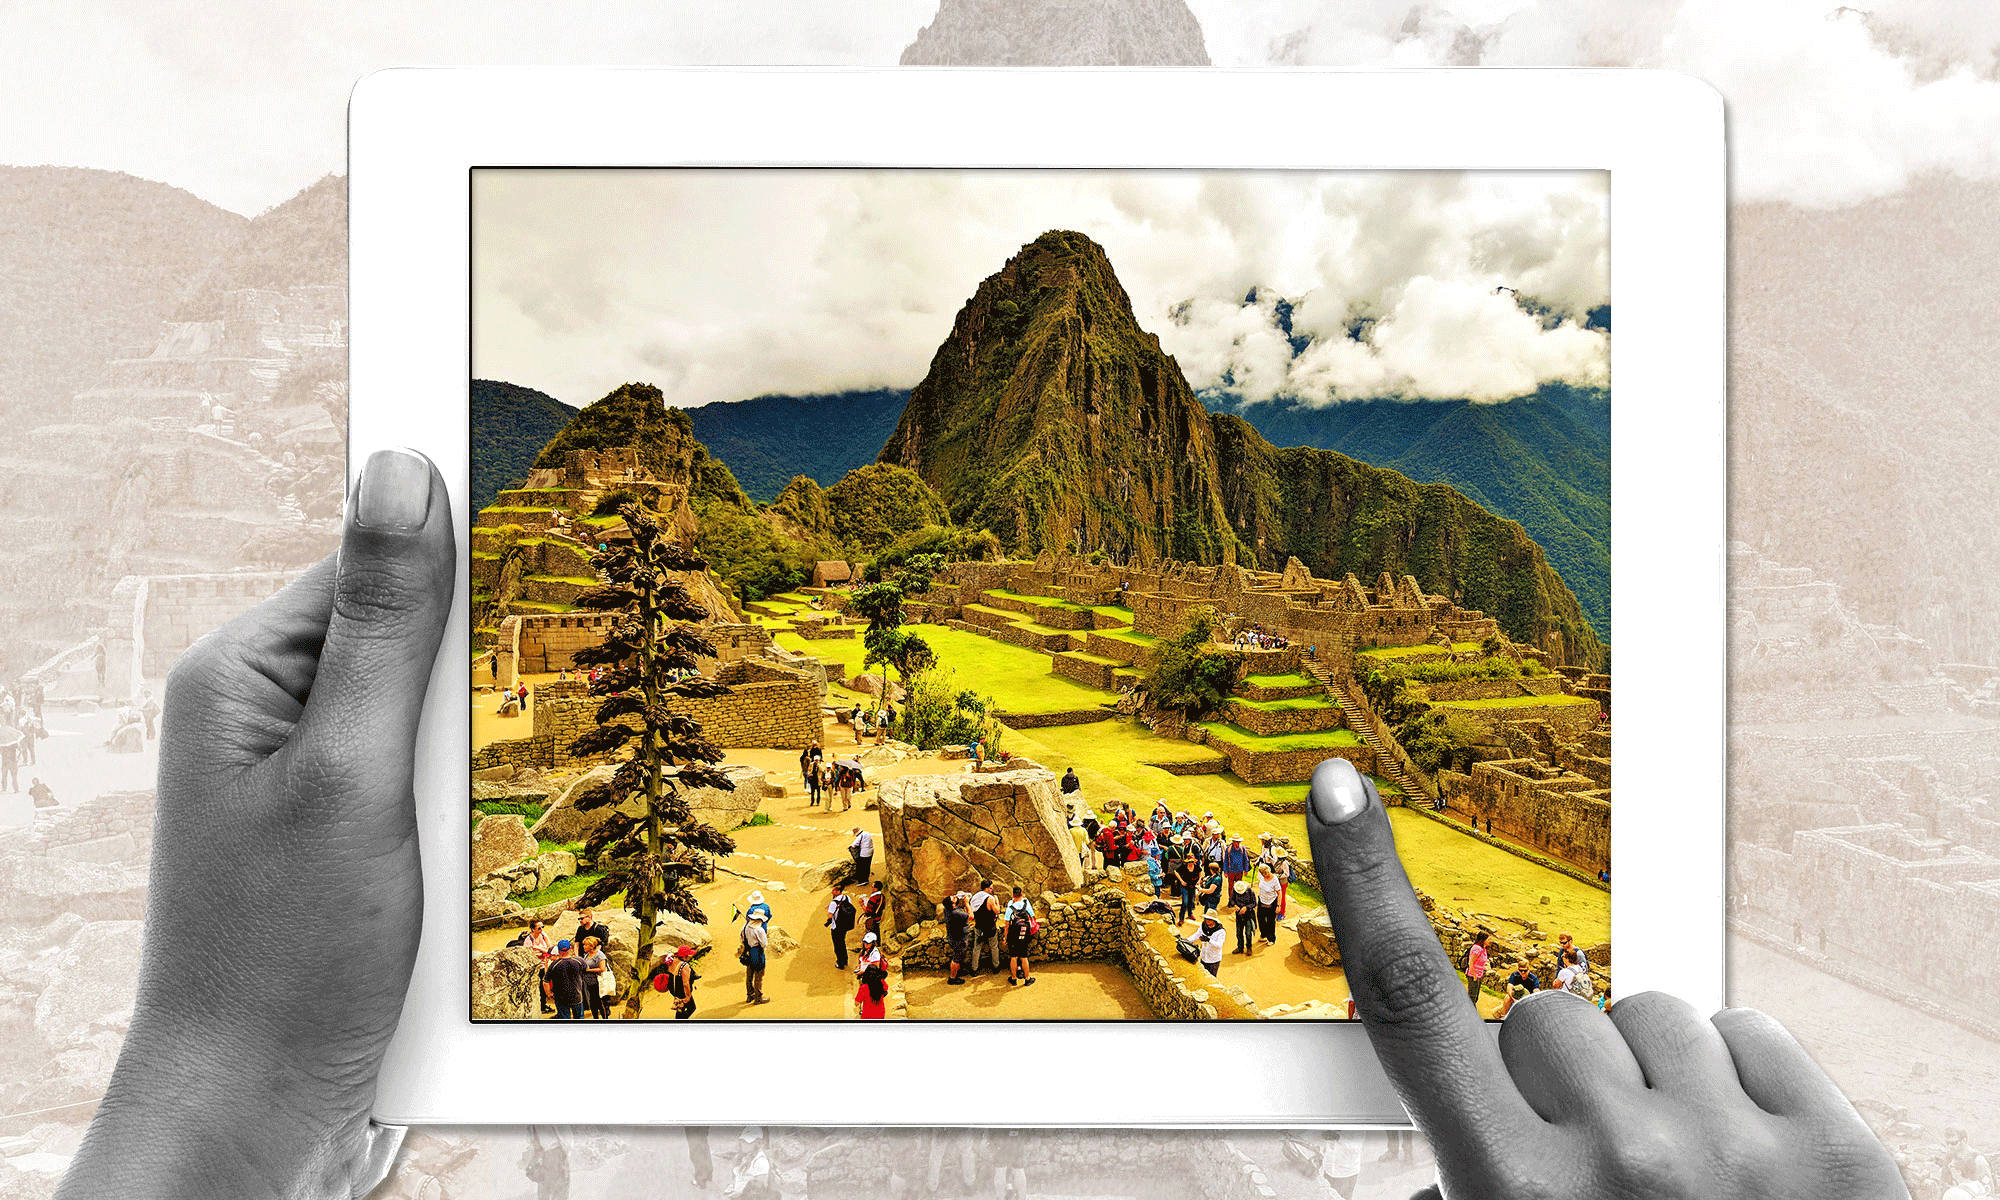 An image of a tablet depicting a scene of machu picchu with the tourists and other people slowly being deleted. 